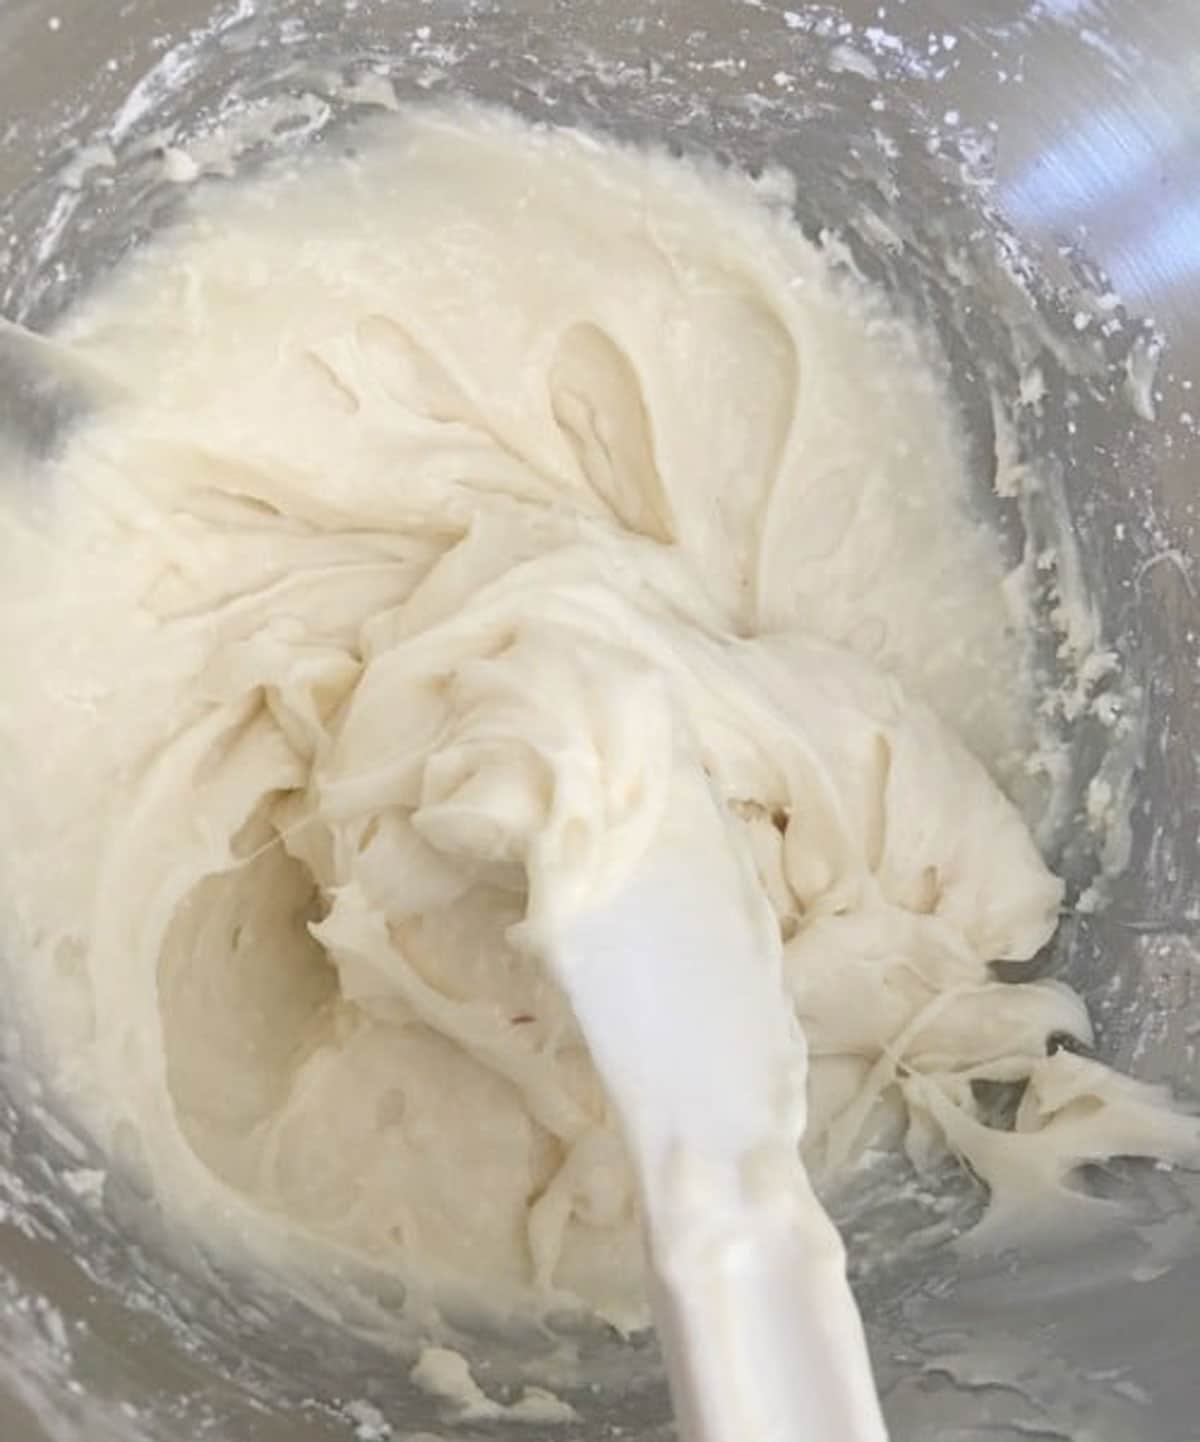 The whipped cream cheese frosting in a bowl.